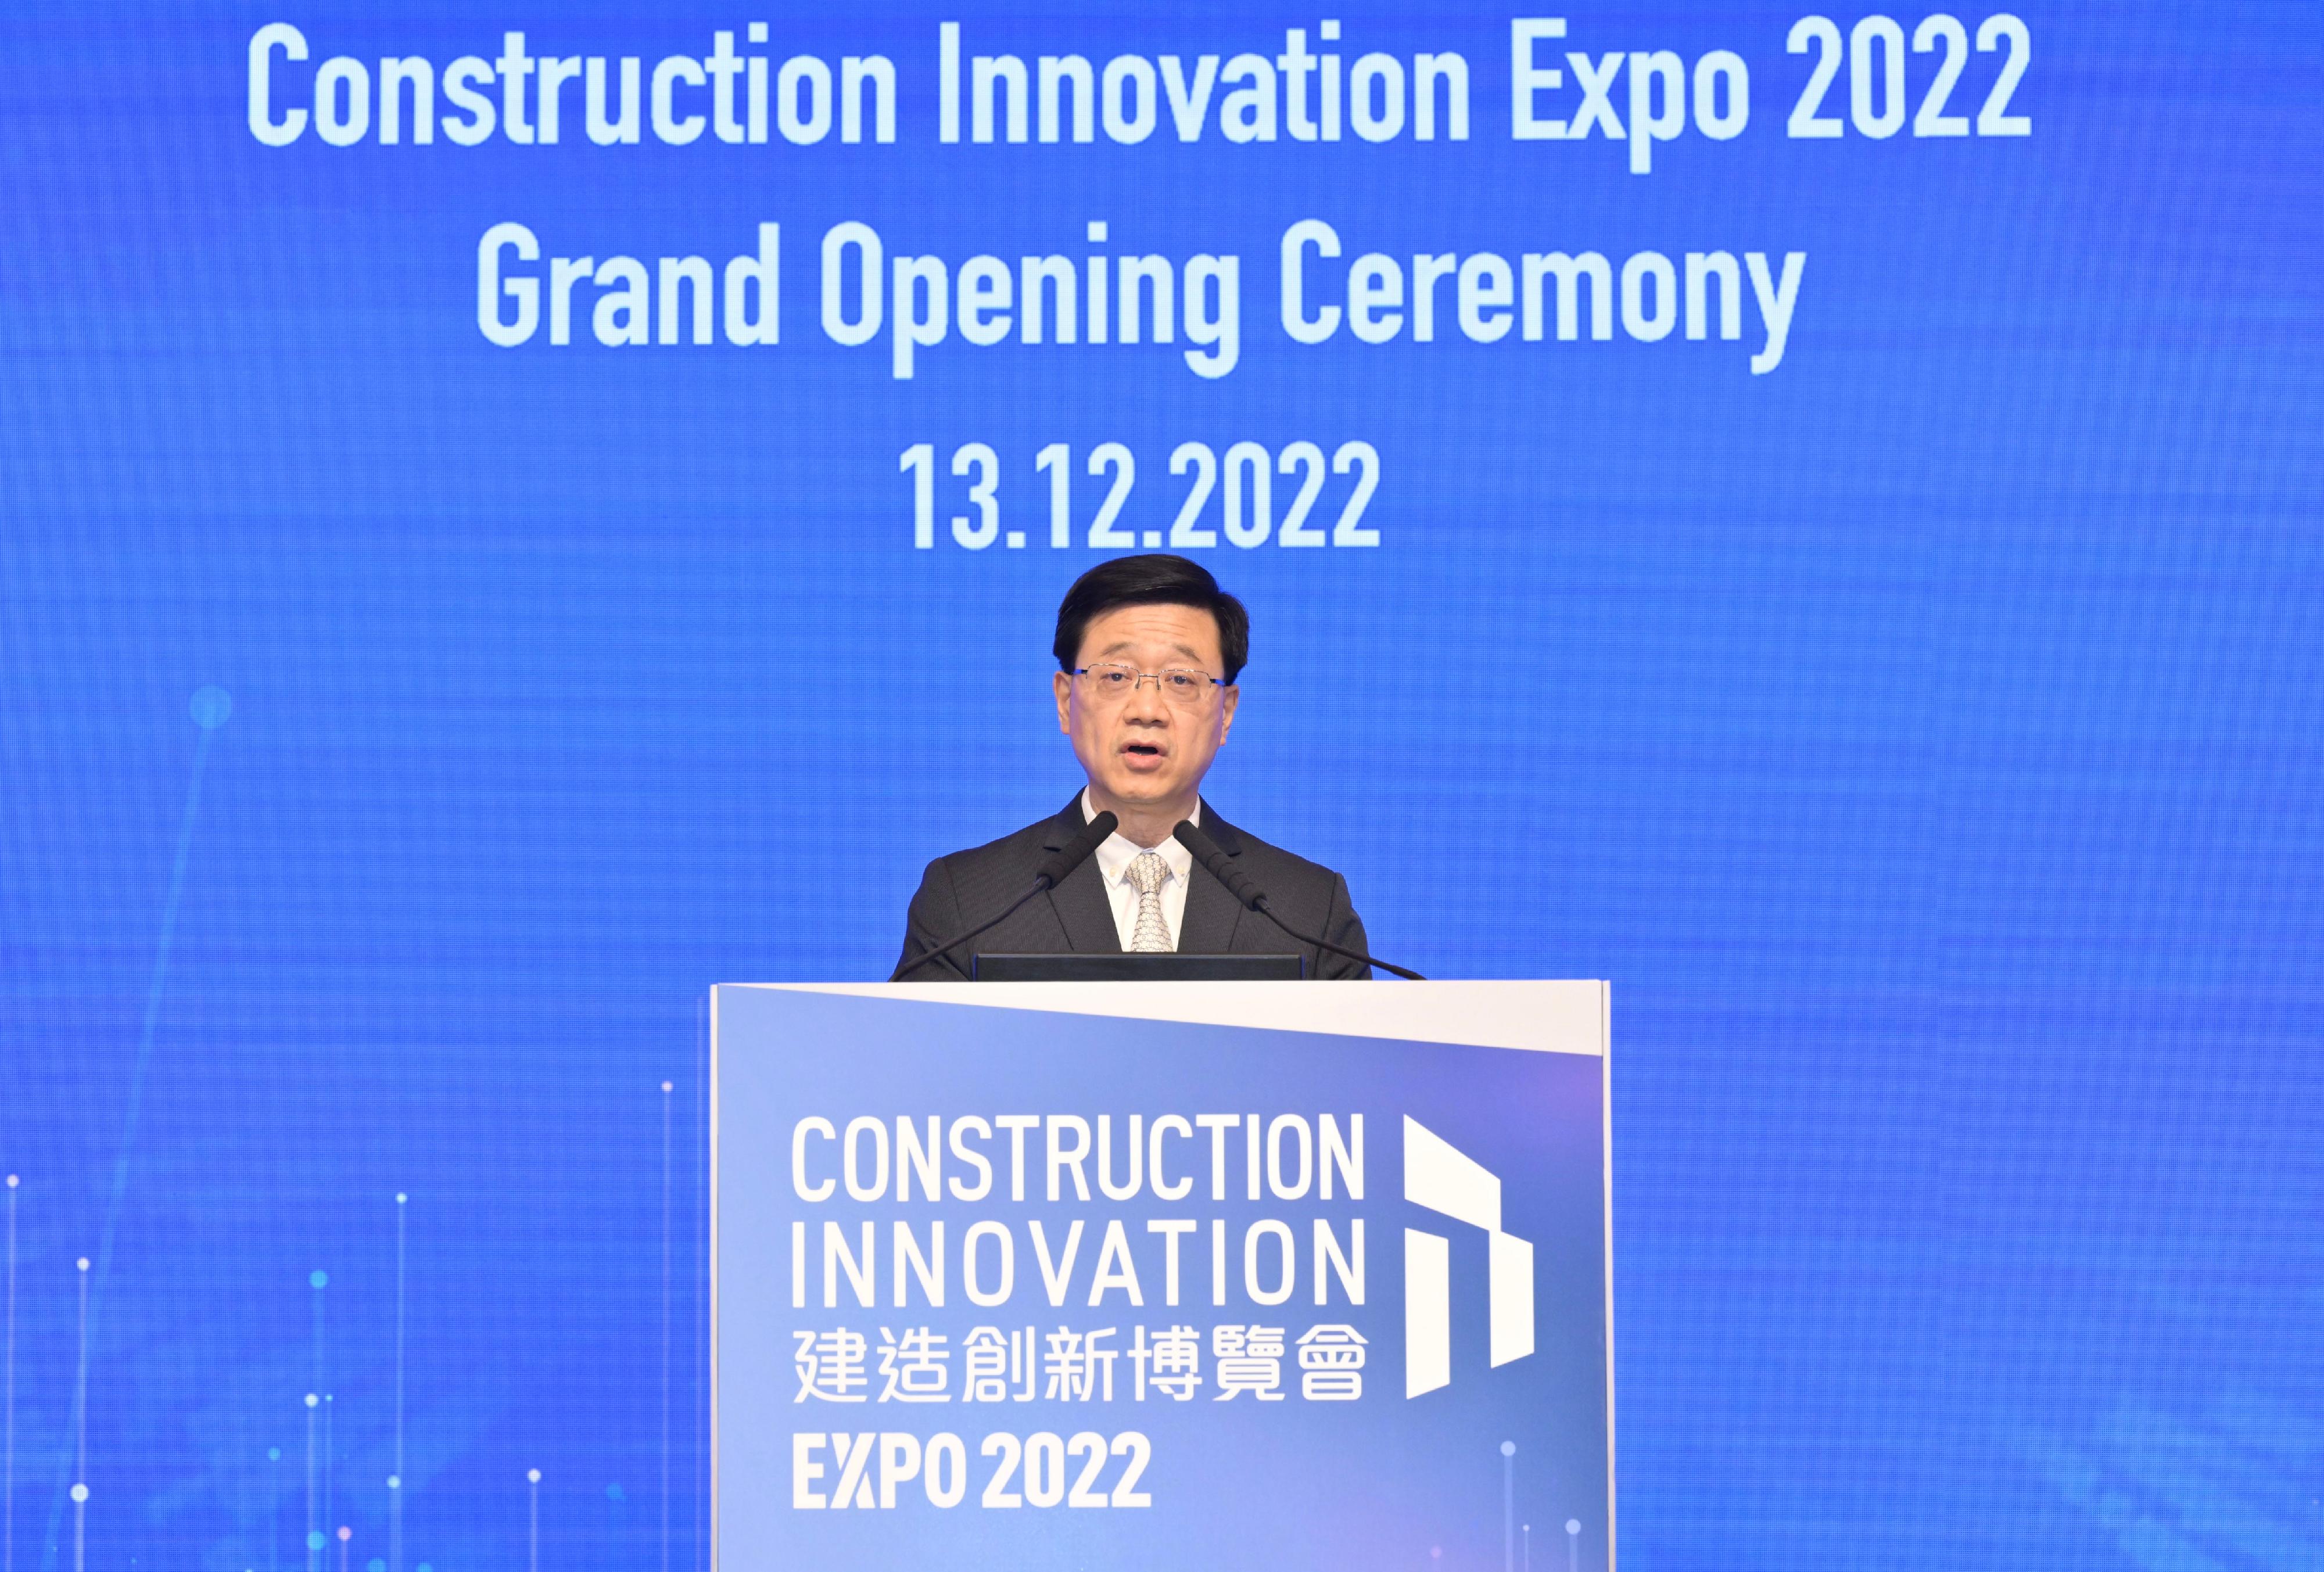 The Chief Executive, Mr John Lee, speaks at the Construction Innovation Expo 2022 Grand Opening Ceremony today (December 13).